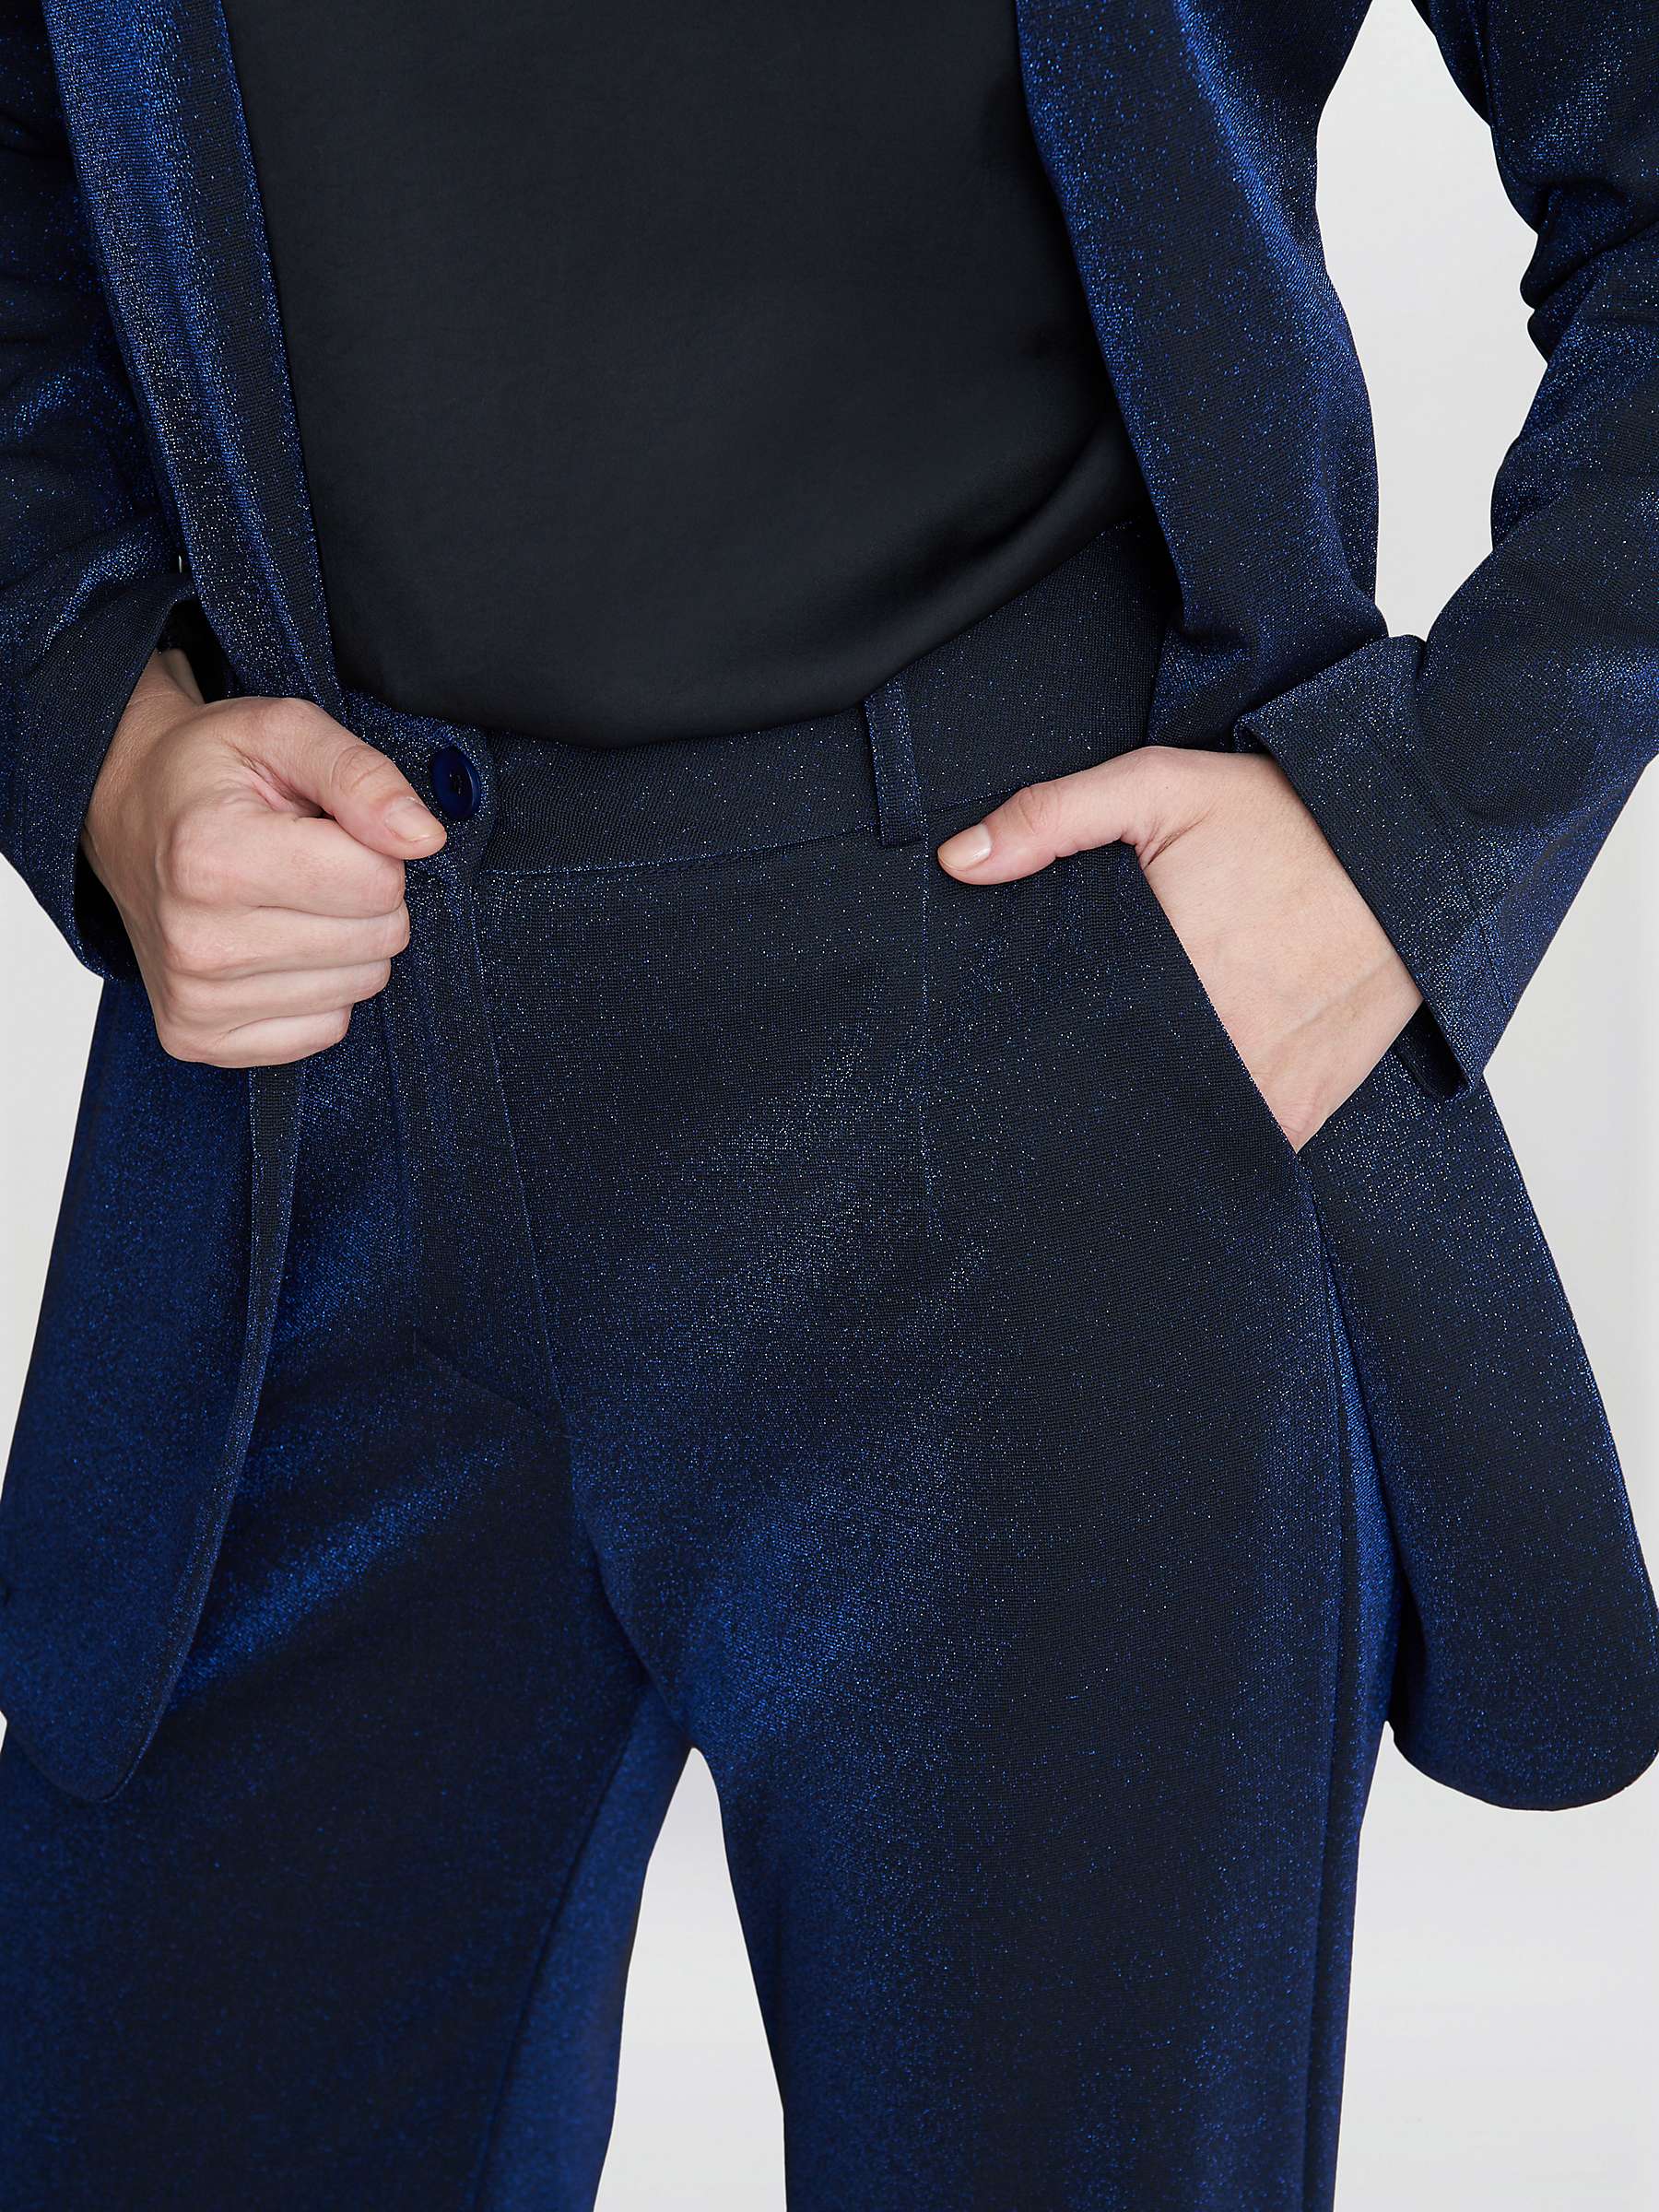 Buy Gina Bacconi Genevive Stretch Metalic Trouser Suit, Navy Online at johnlewis.com